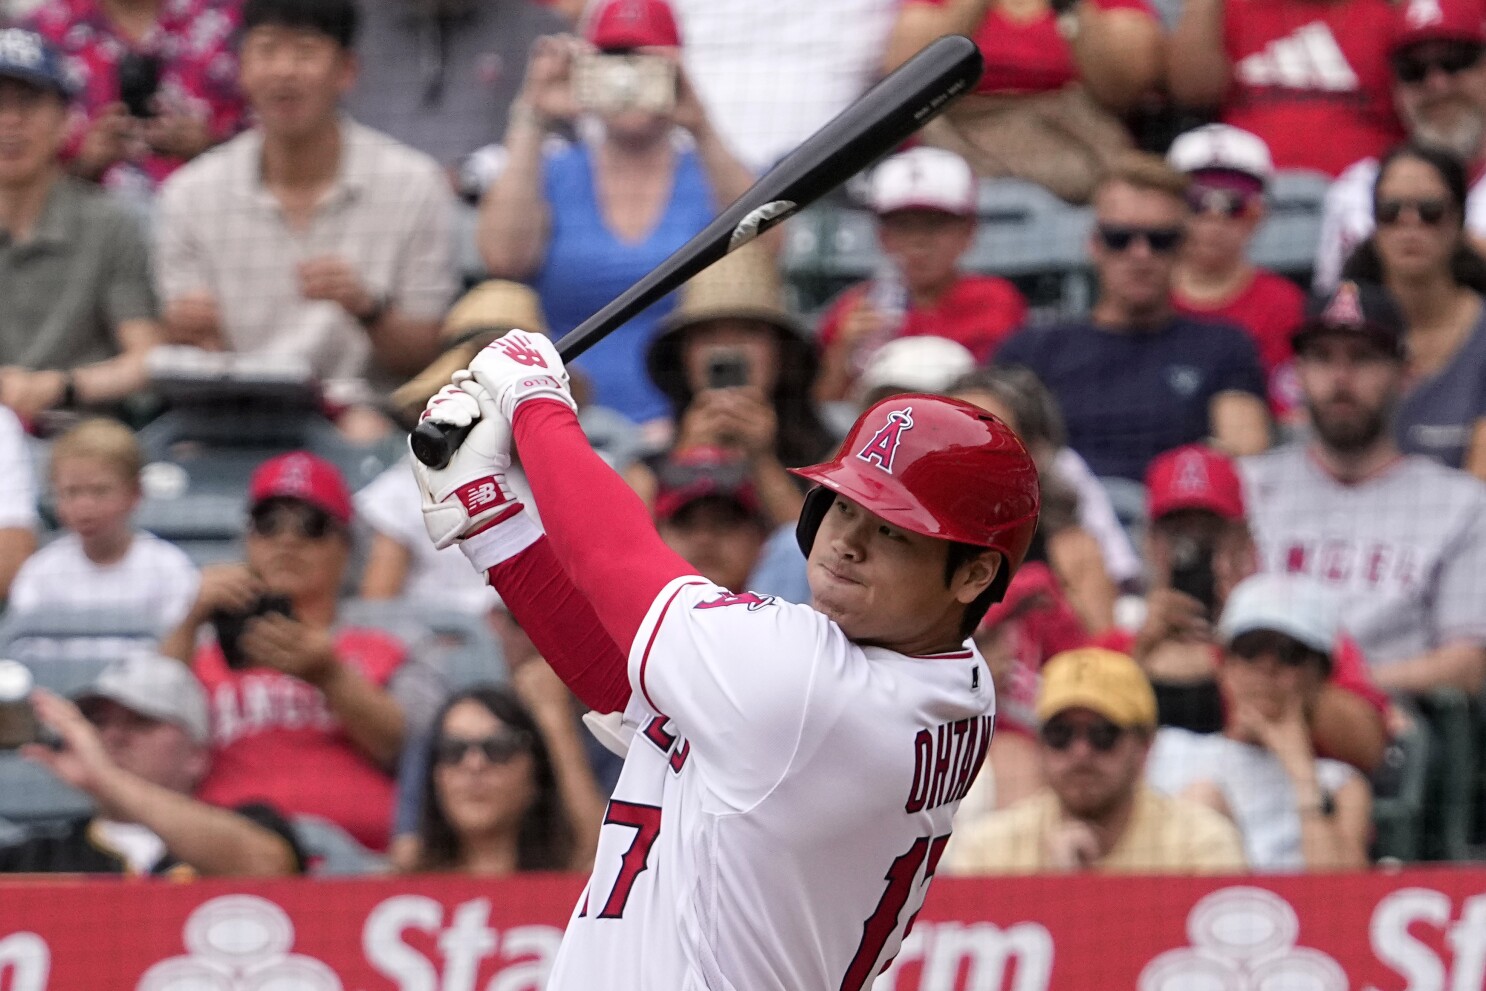 Shohei Ohtani homers in last home game before trade deadline as the Angels  beat the Pirates 7-5